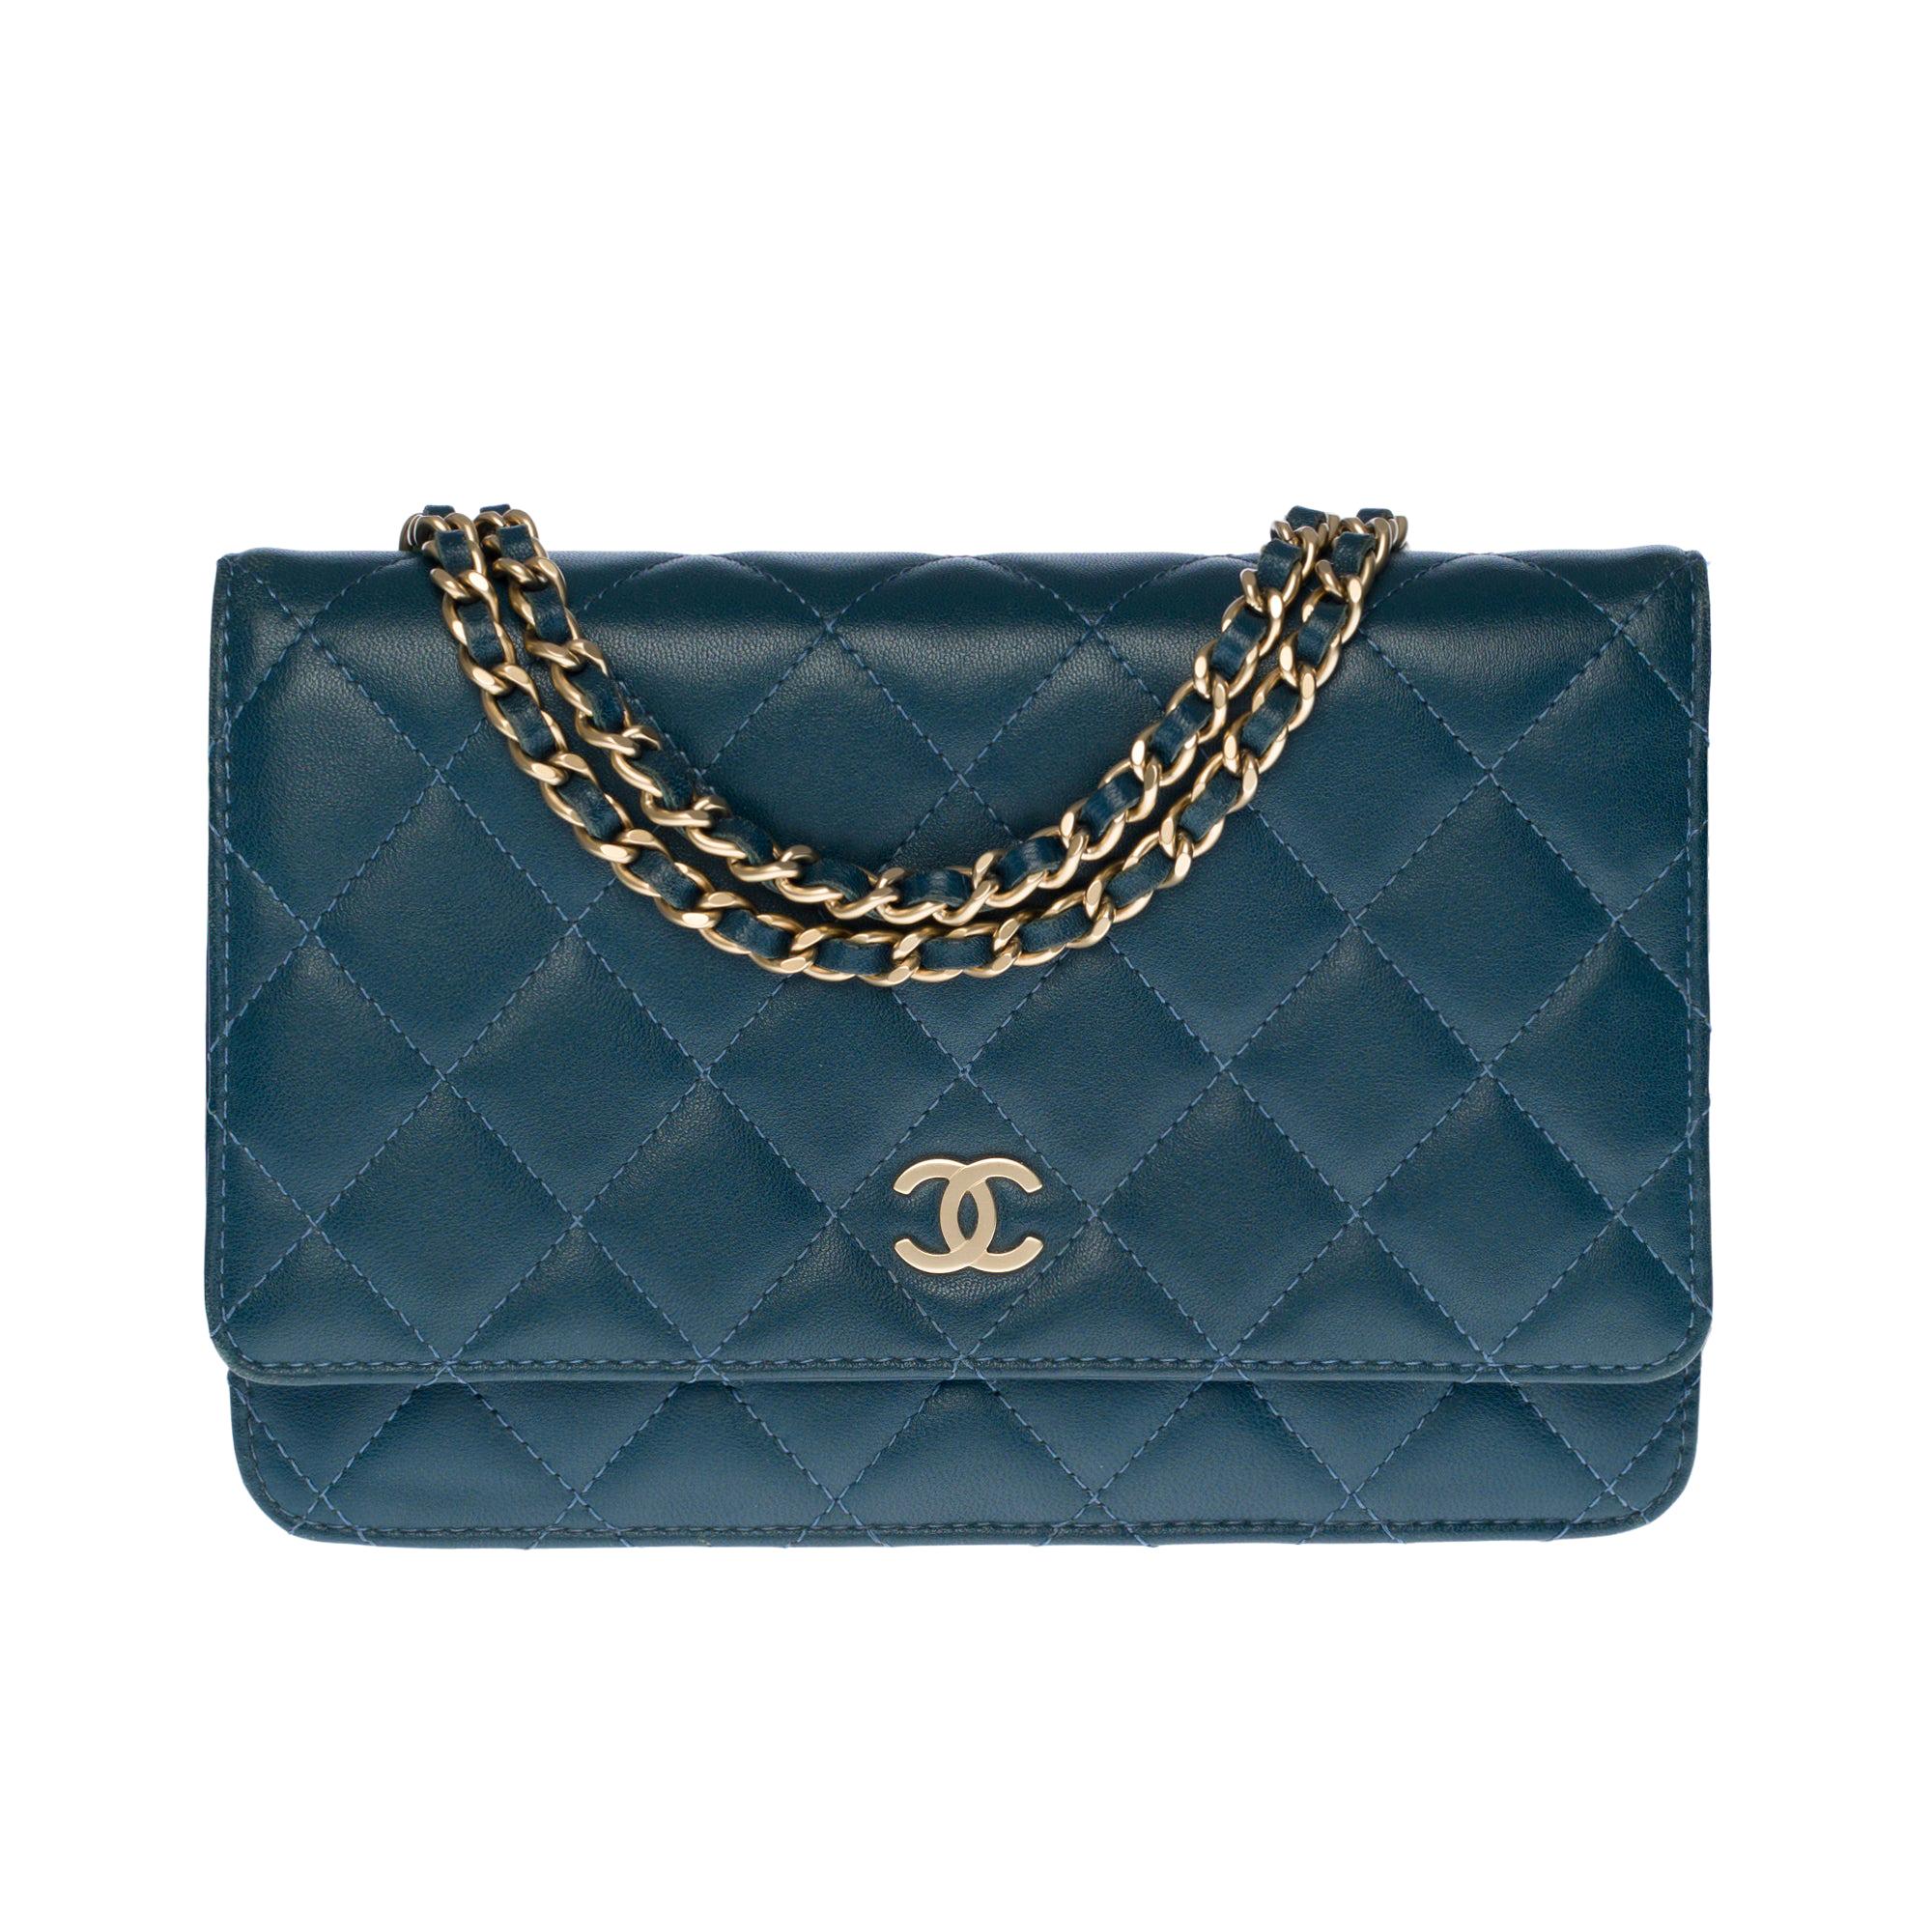 Amazing Chanel Wallet on Chain (WOC) shoulder bag in blue quilted leather, GHW